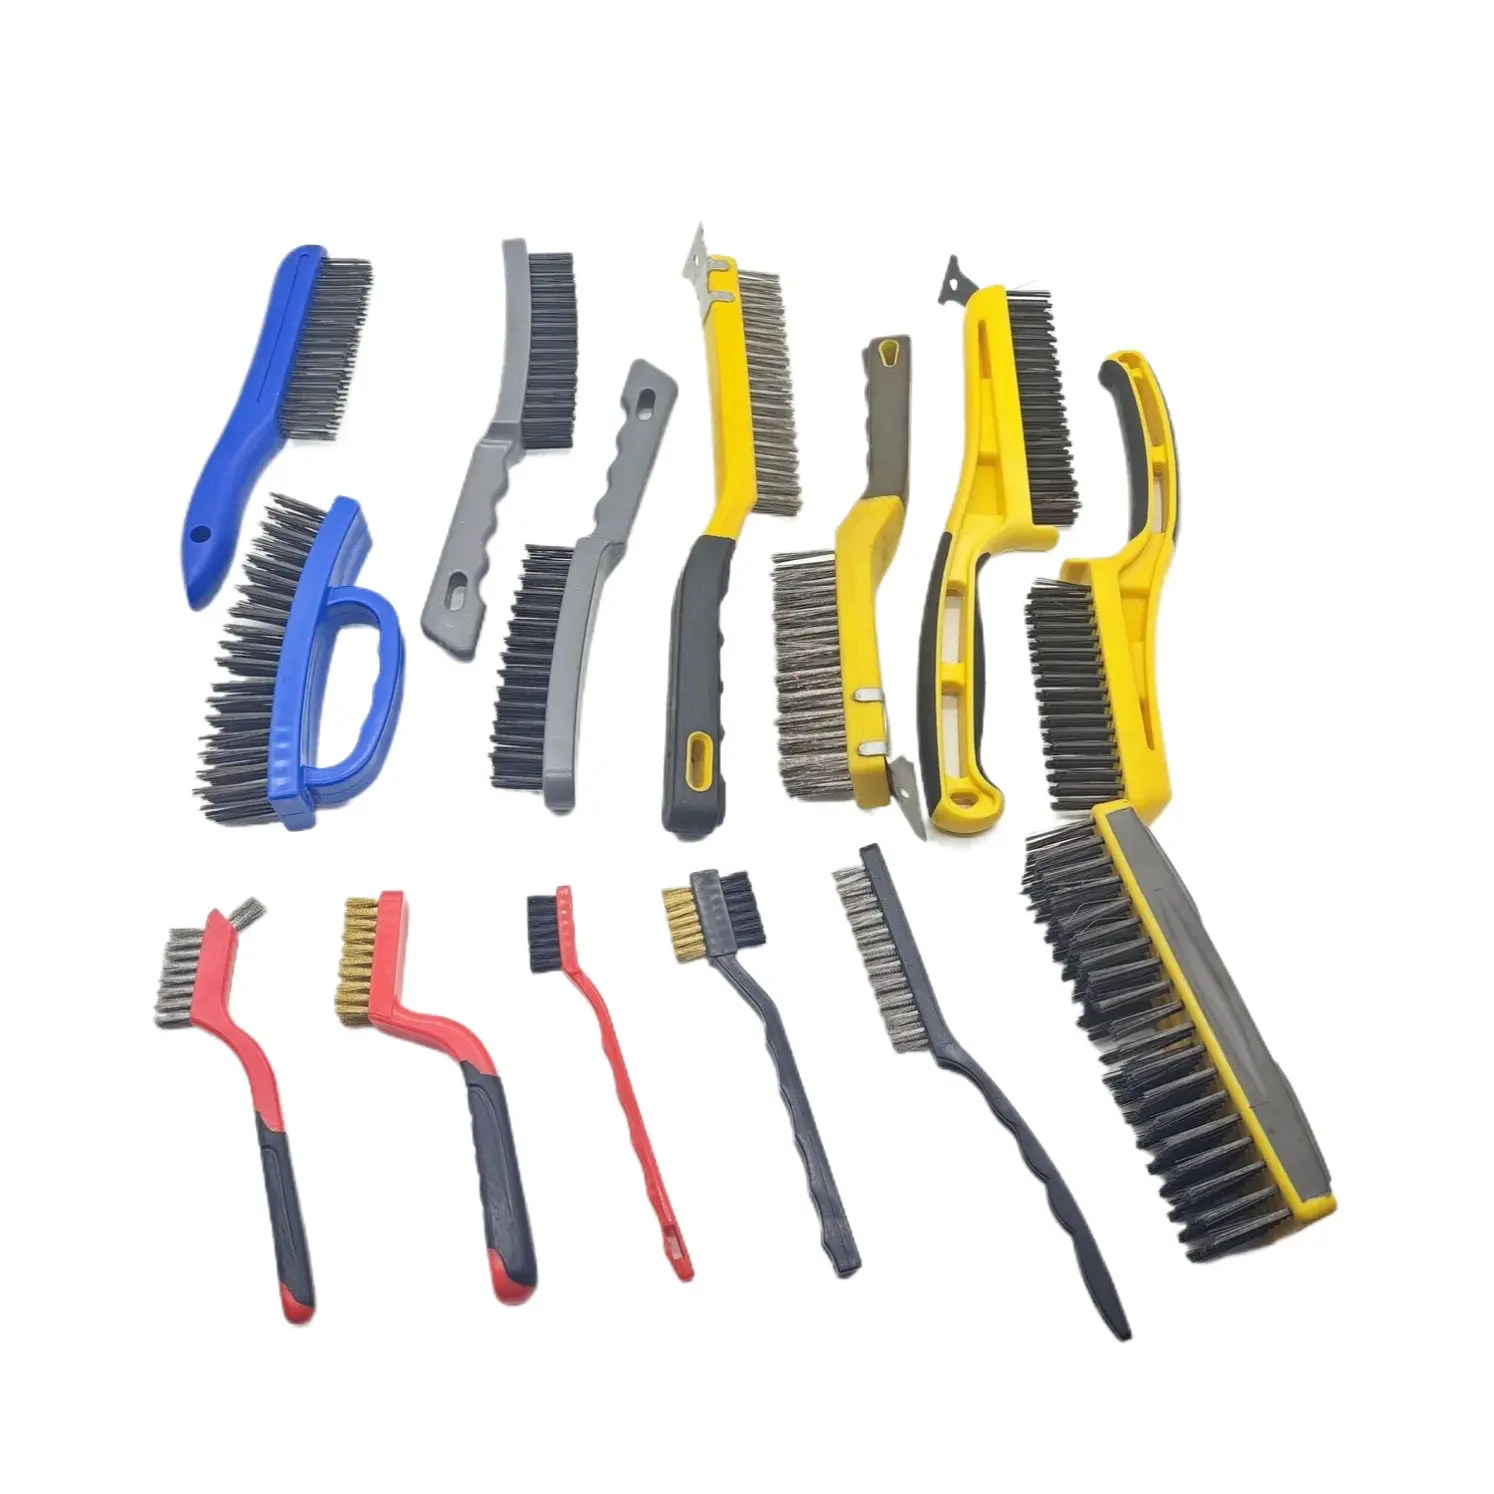 4 Rows Of Plastic Handles Wire Brush Bbq Brush Barbecue Oven Grill Wire Brush